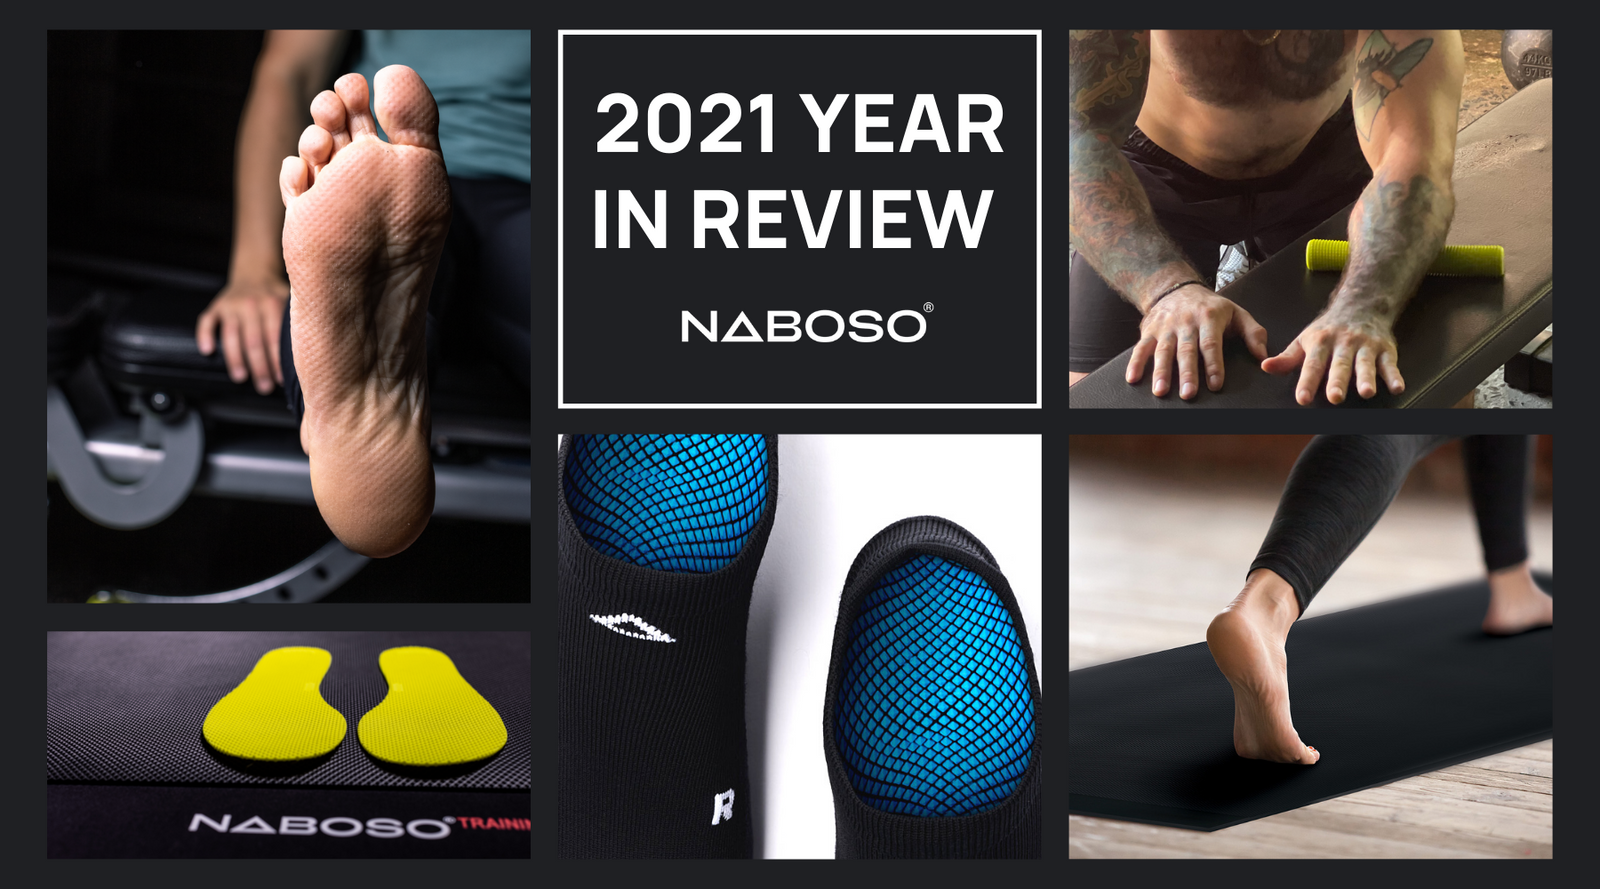 Naboso 2021 Year in Review